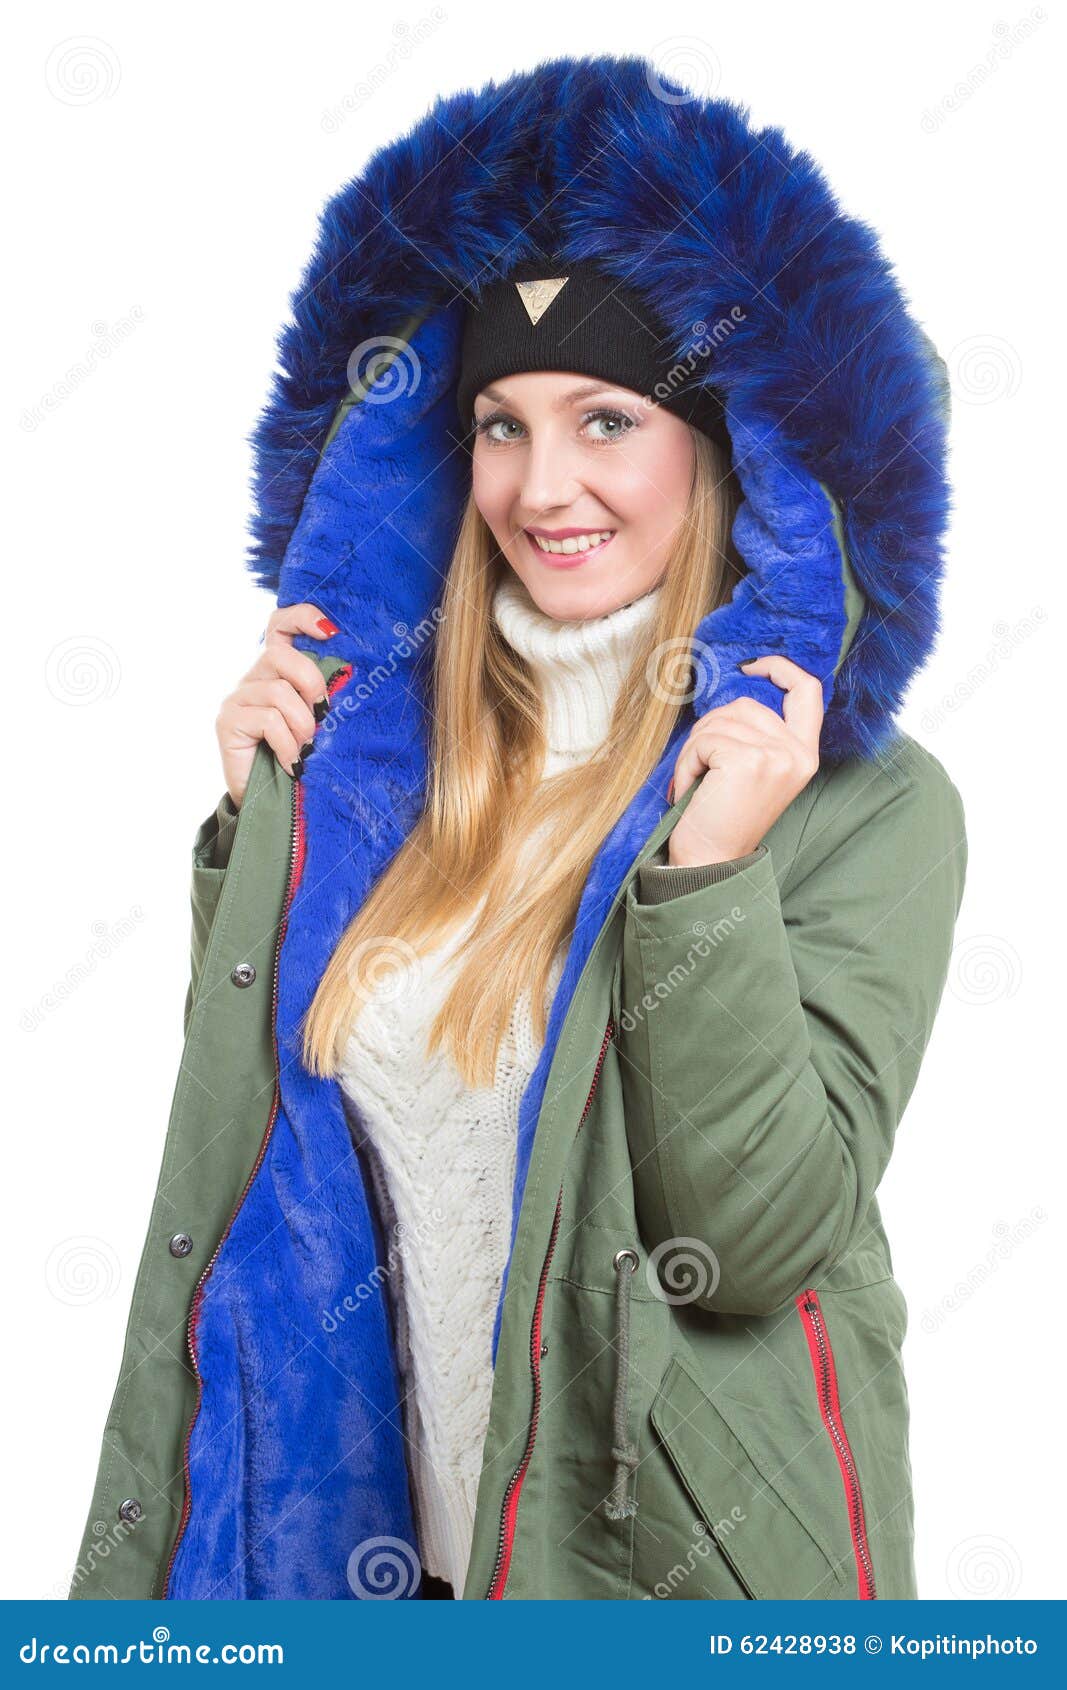 Woman Wearing Winter Jacket Scarf and Cap Stock Photo - Image of cute ...